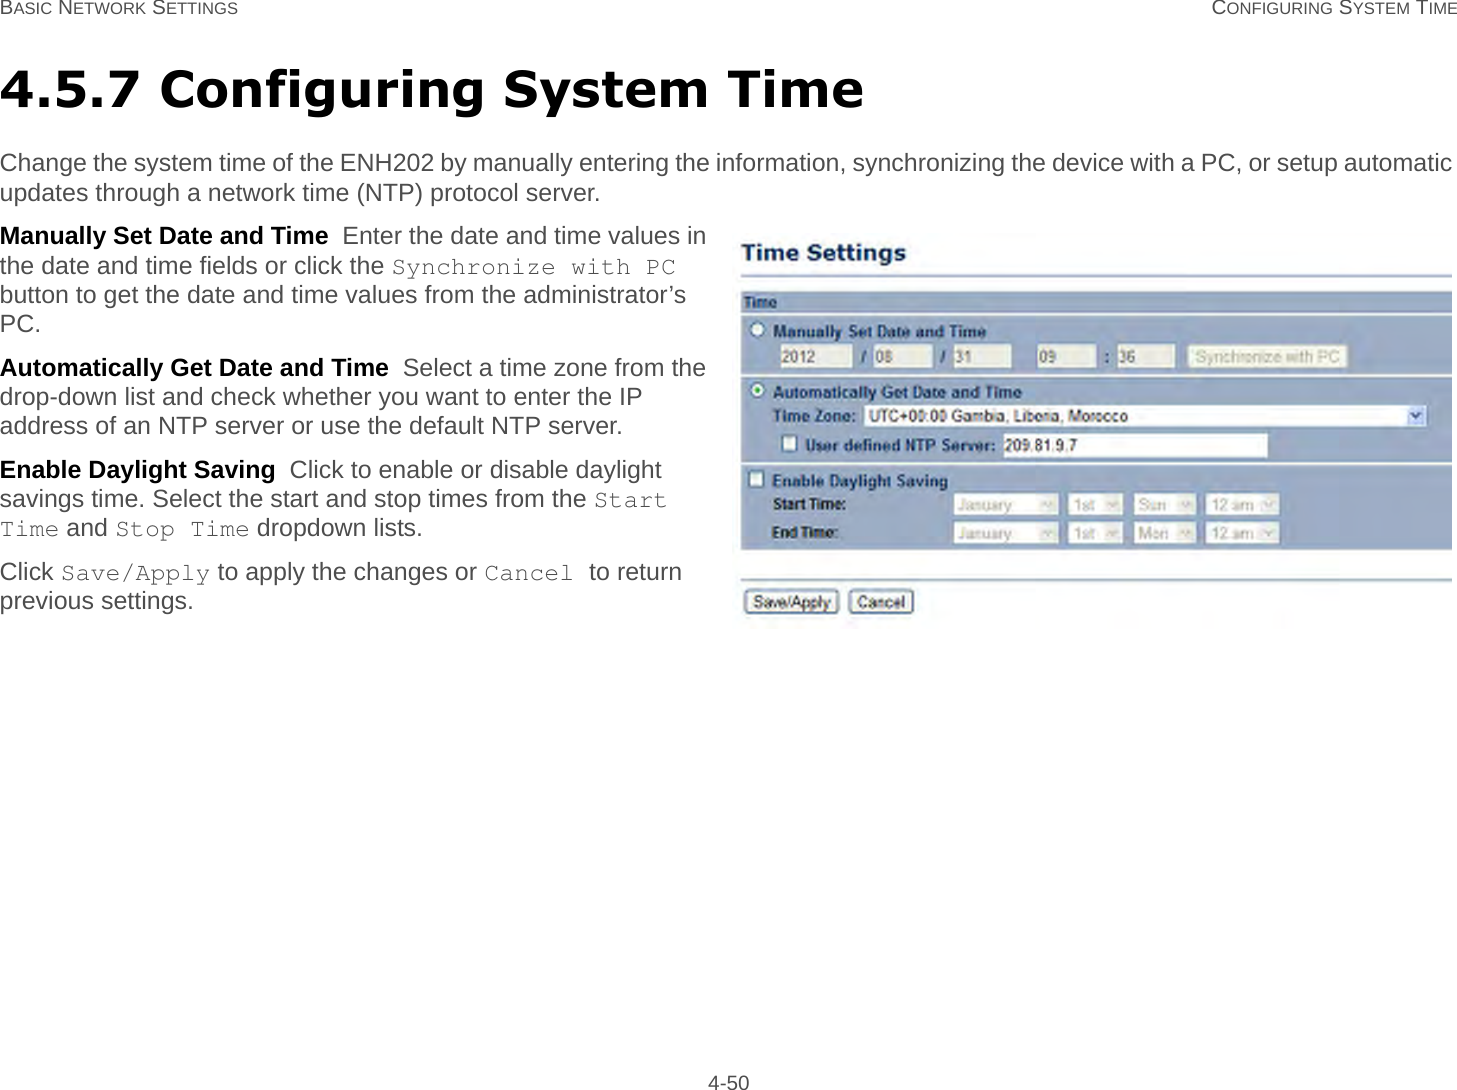 BASIC NETWORK SETTINGS CONFIGURING SYSTEM TIME 4-504.5.7 Configuring System TimeChange the system time of the ENH202 by manually entering the information, synchronizing the device with a PC, or setup automatic updates through a network time (NTP) protocol server.Manually Set Date and Time  Enter the date and time values in the date and time fields or click the Synchronize with PC button to get the date and time values from the administrator’s PC.Automatically Get Date and Time  Select a time zone from the drop-down list and check whether you want to enter the IP address of an NTP server or use the default NTP server.Enable Daylight Saving  Click to enable or disable daylight savings time. Select the start and stop times from the Start Time and Stop Time dropdown lists.Click Save/Apply to apply the changes or Cancel to return previous settings.